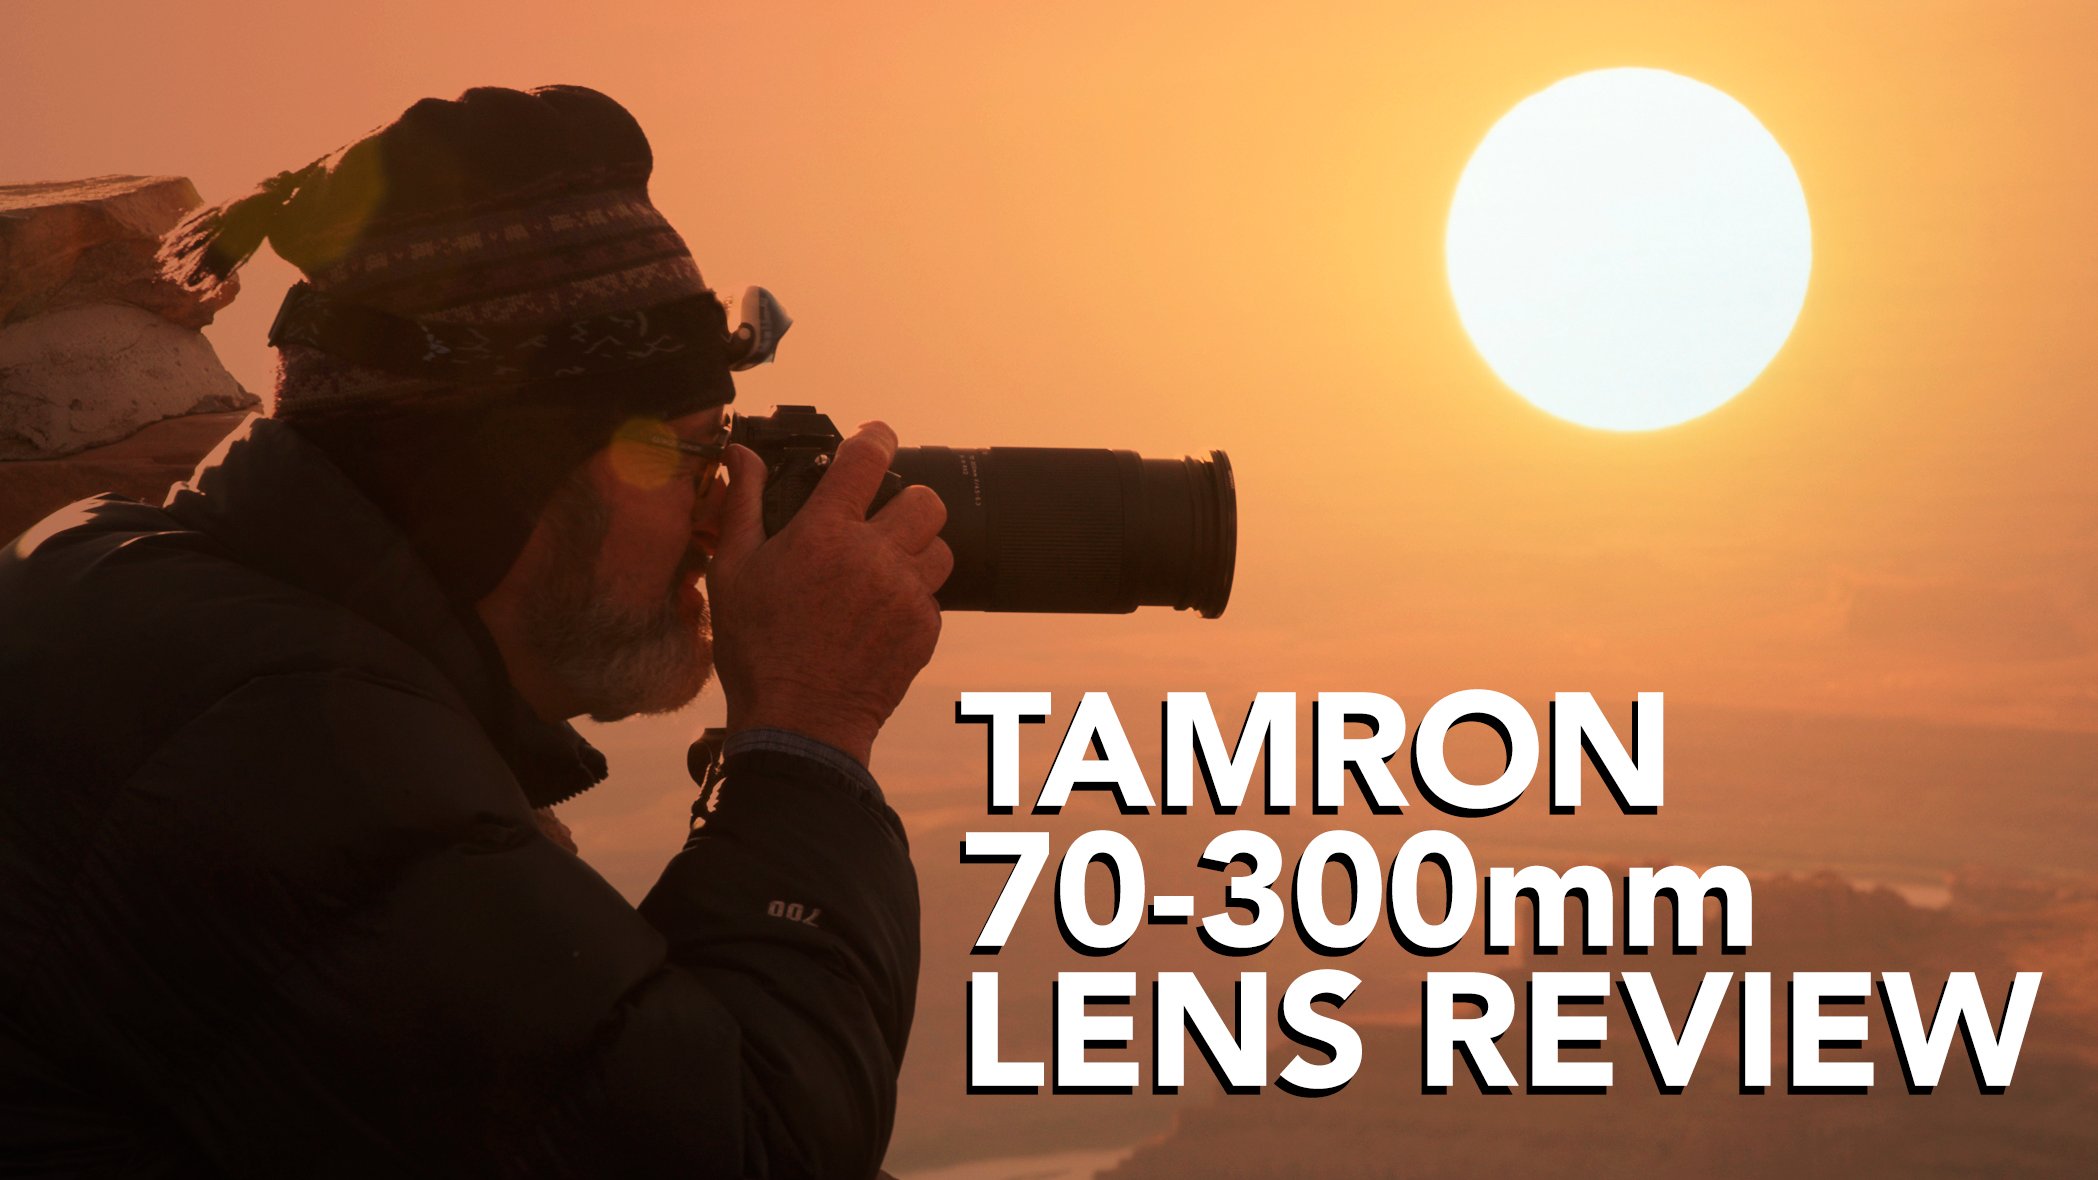 Lens Review: The Tamron 70-300mm Telephoto Zoom for Sony E-Mount